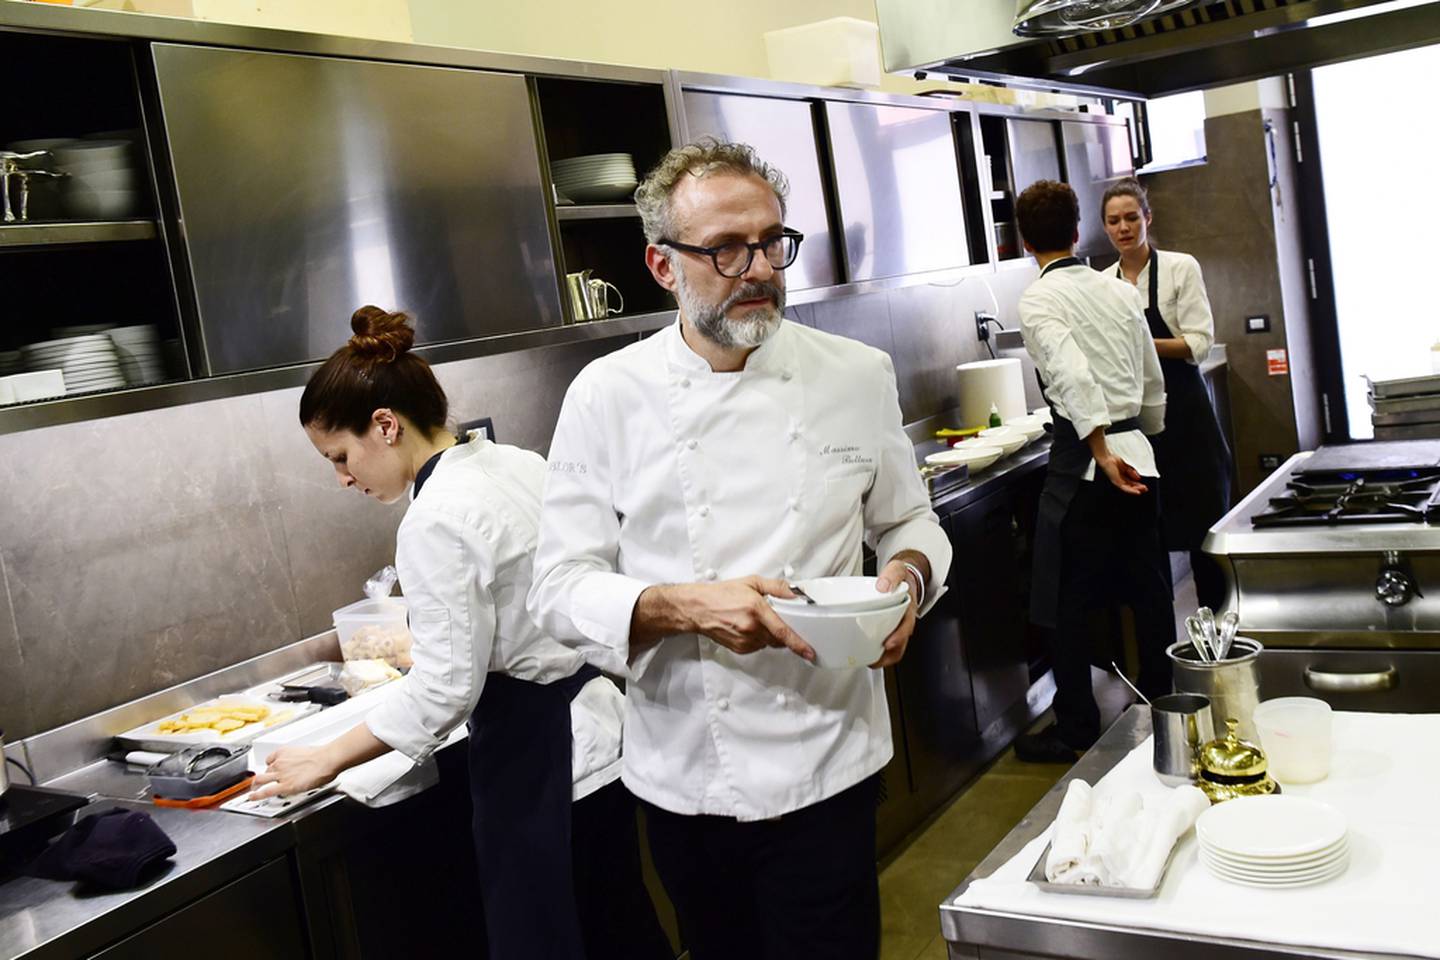 Italian chef Massimo Bottura working in the kitchen of his restaurant Osteria Francescana in Modena. AFP